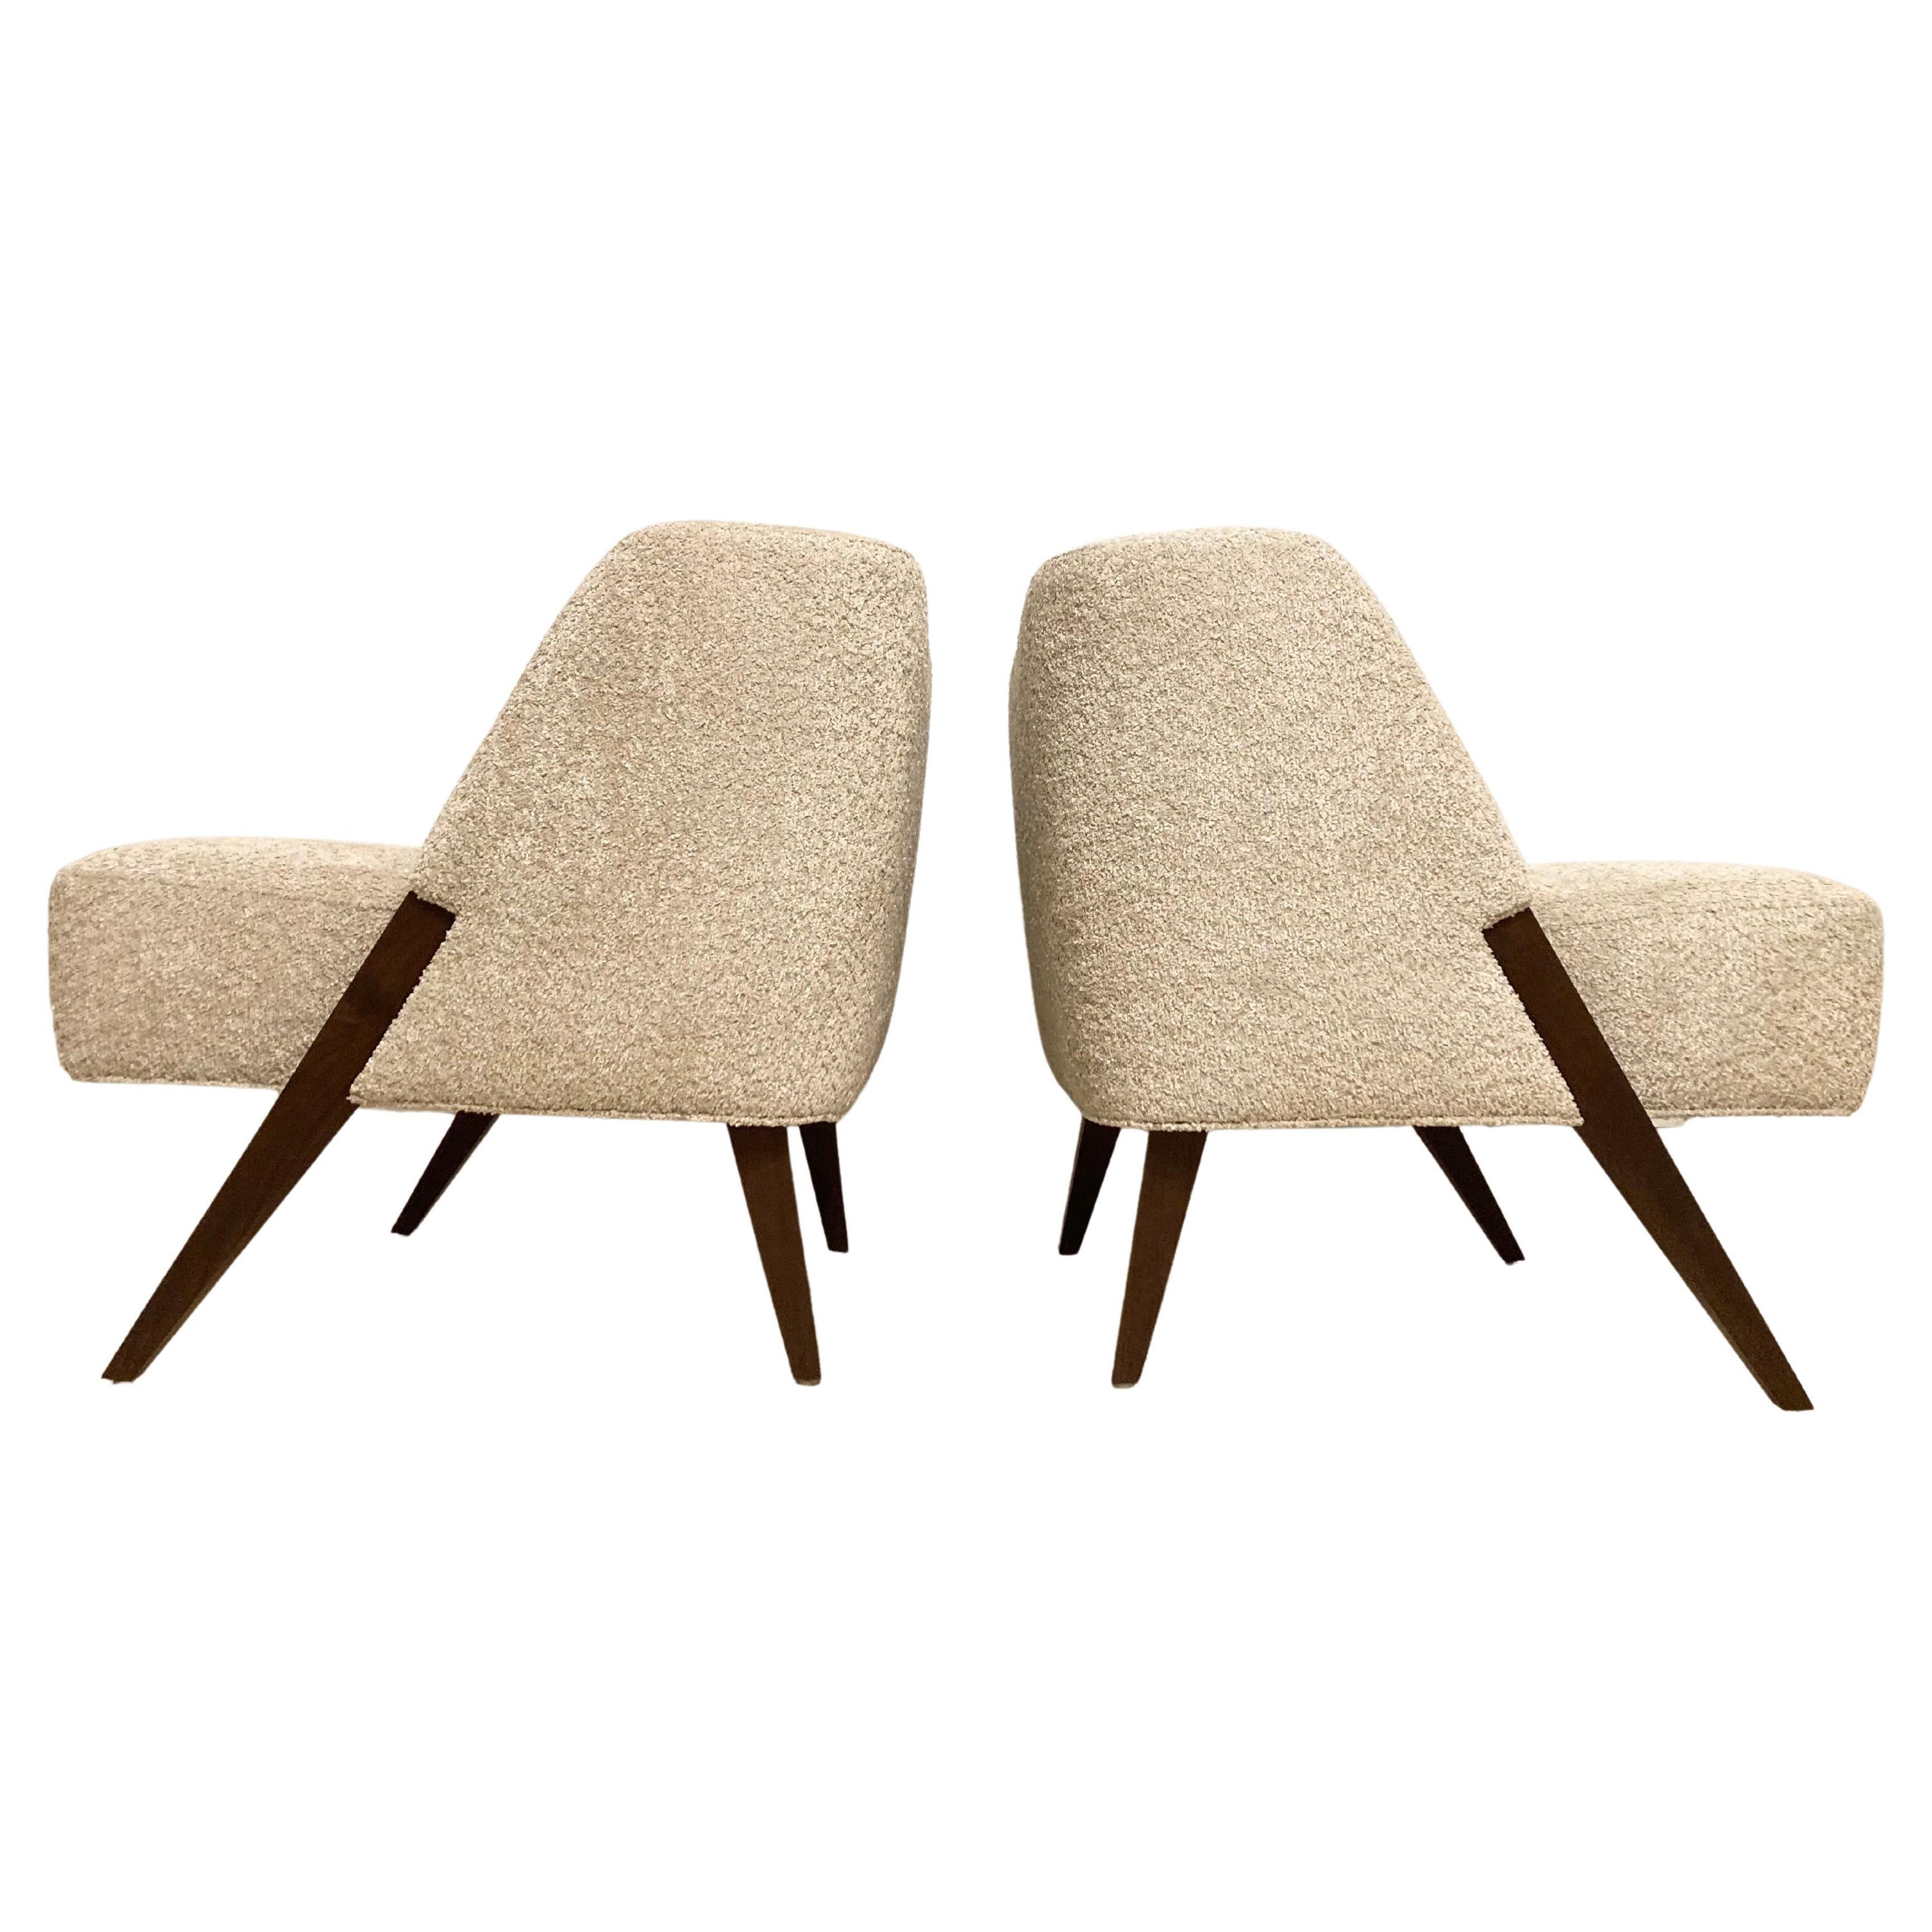 Pair of Lounge Chairs Attributed to Gio Ponti, Walnut and Bouclé Fabric